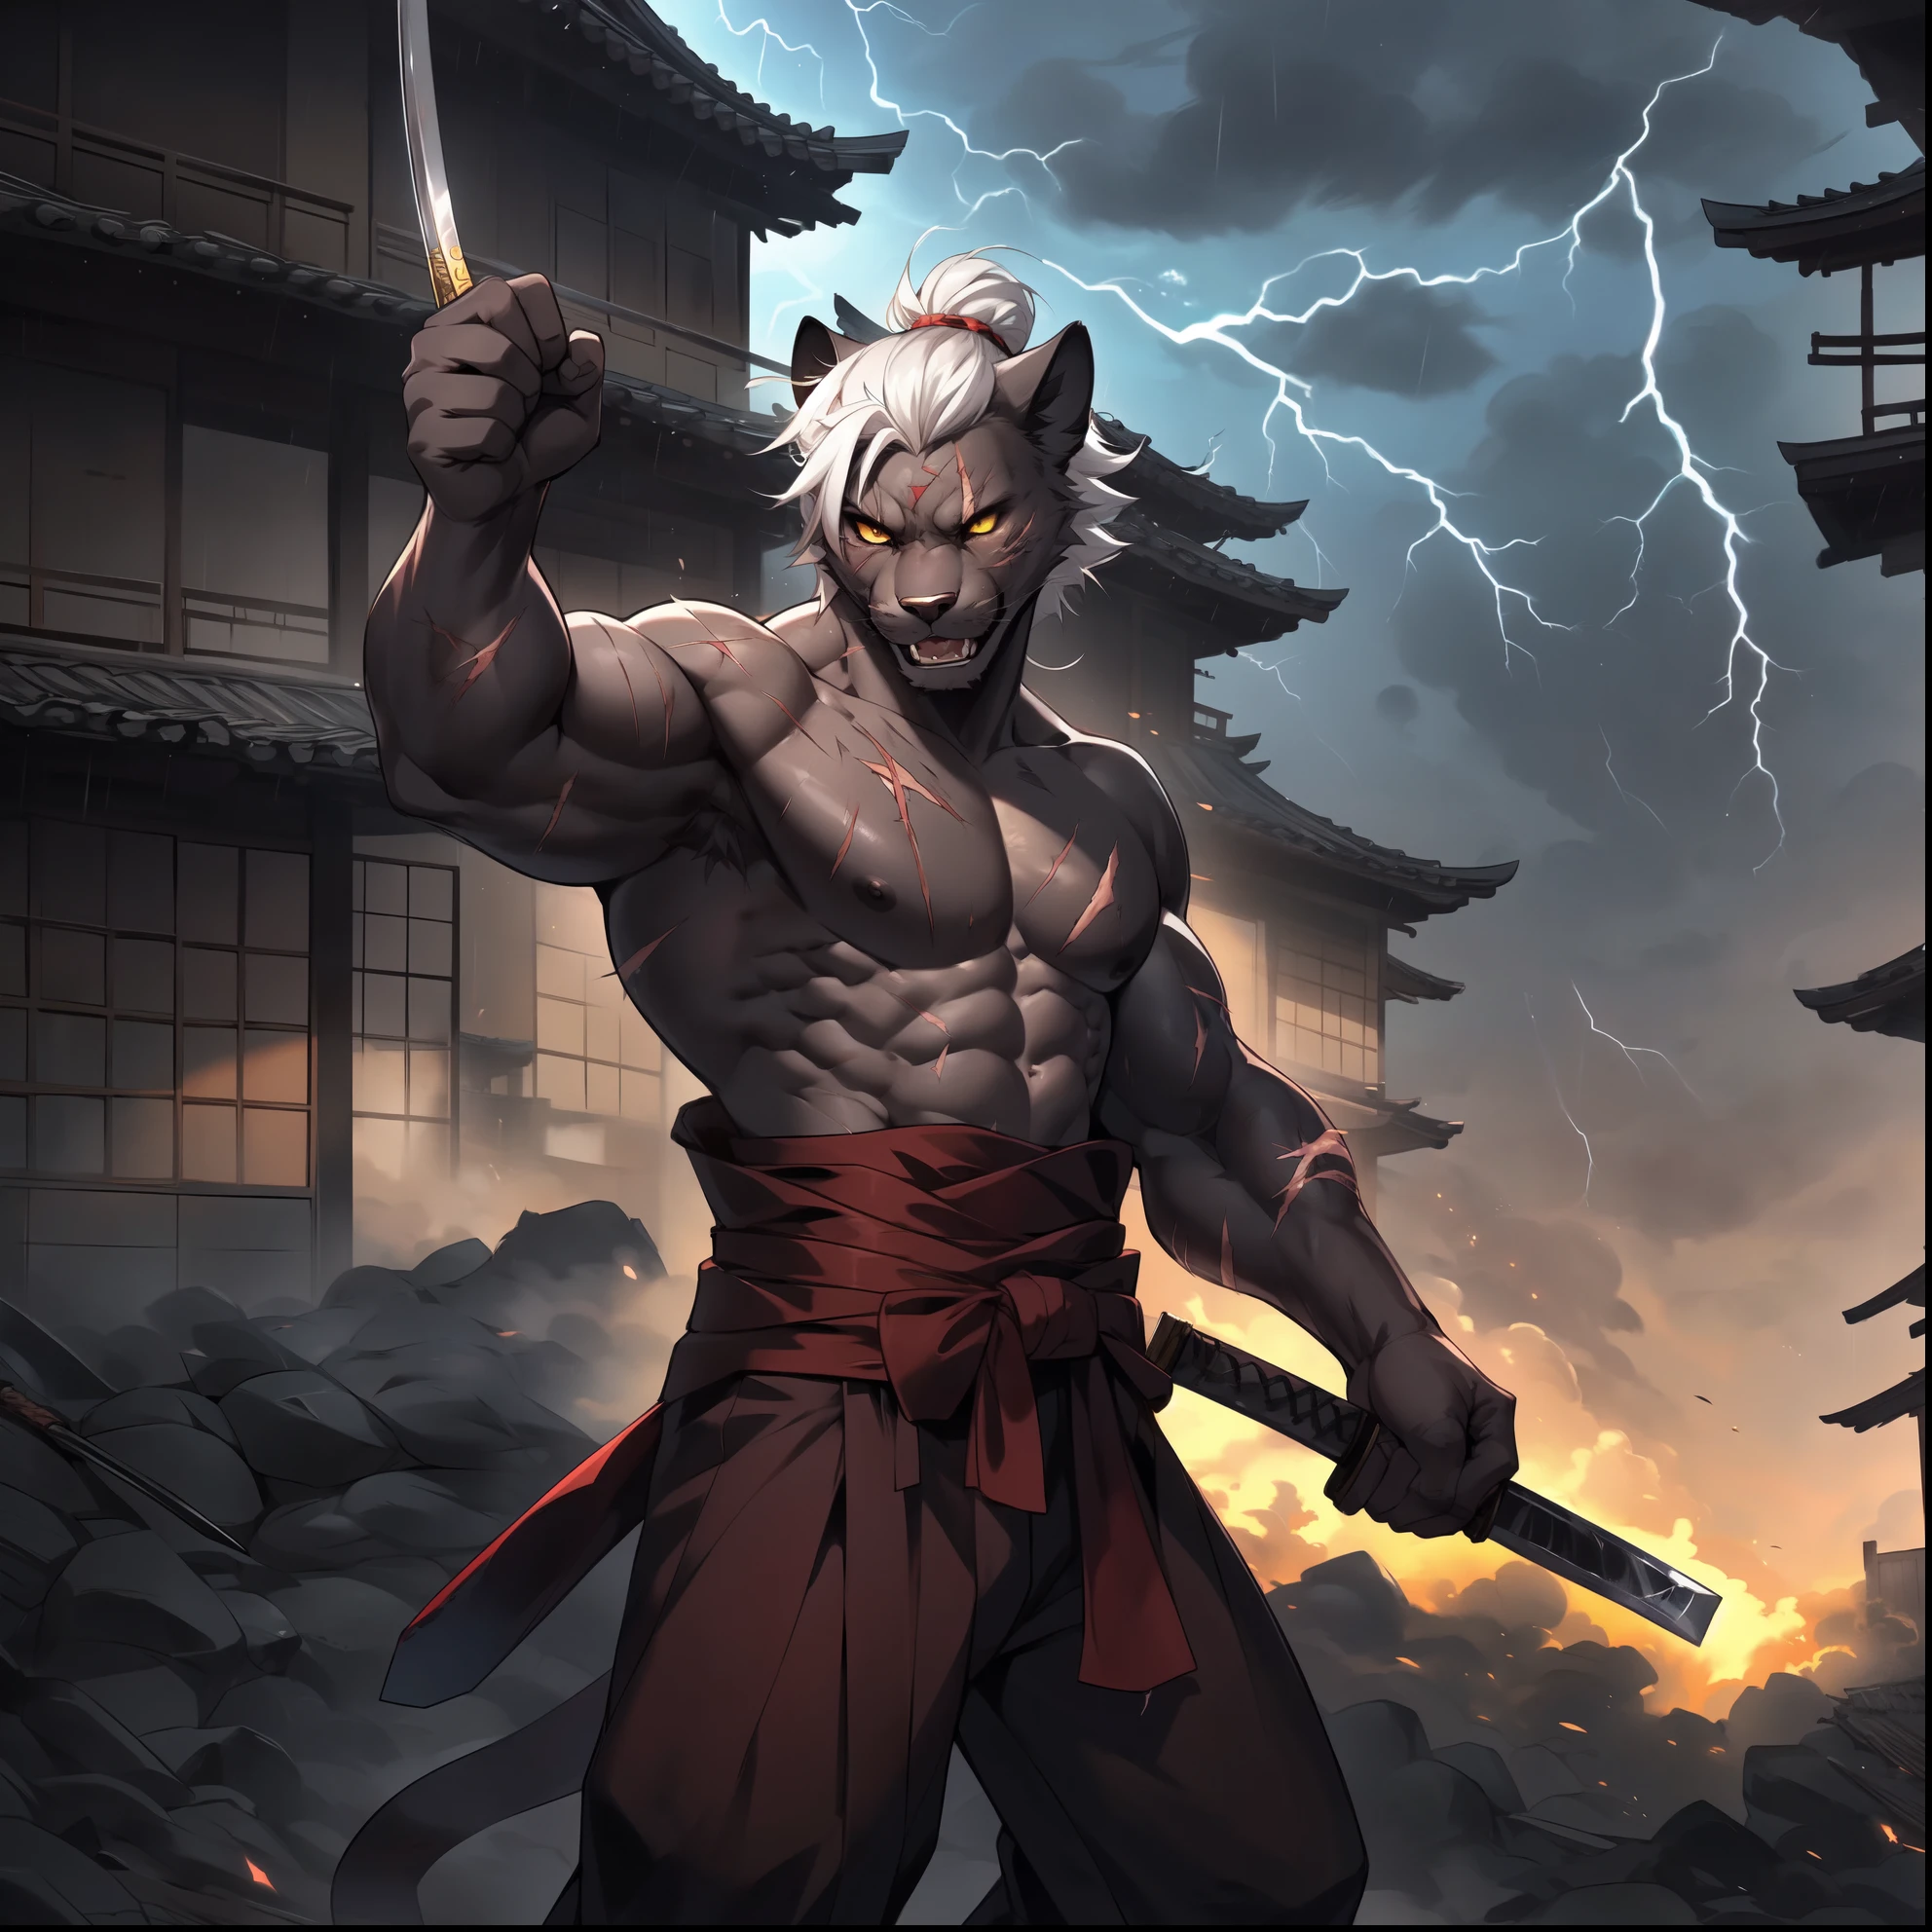 Solo, cute black panther male, yellow eyes, snout, masculine, muscular, white hair, top knot hair, snarling, feline teeth, scar on left eye, scars and cut wounds on body, shirtless, wearing red hakama pants, muscles flexing, holding katana sword by the handle, elegant katana, in a dark destroyed Japanese village, thunderstorm, by fumiko, by hyattlen, by gudlmok99